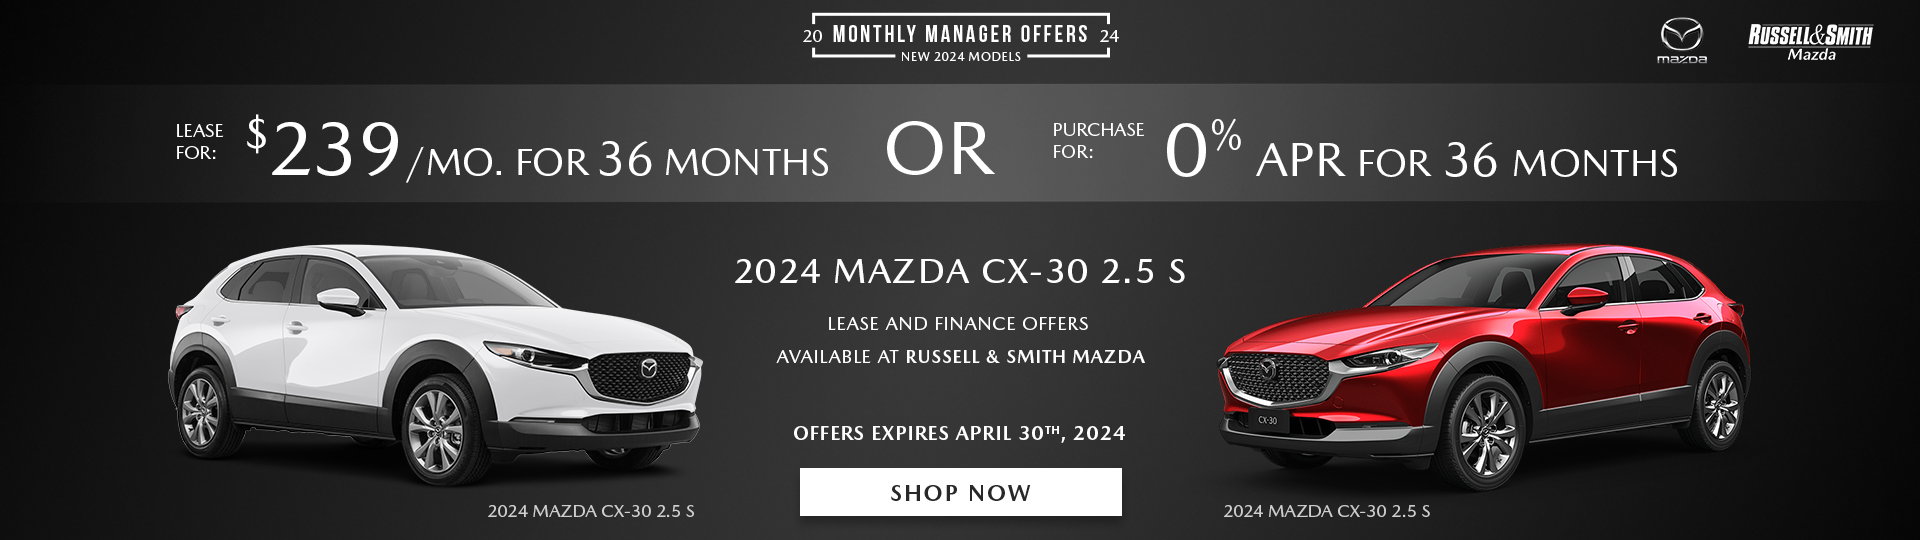 2024 Mazda CX-30 lease deals and finance specials